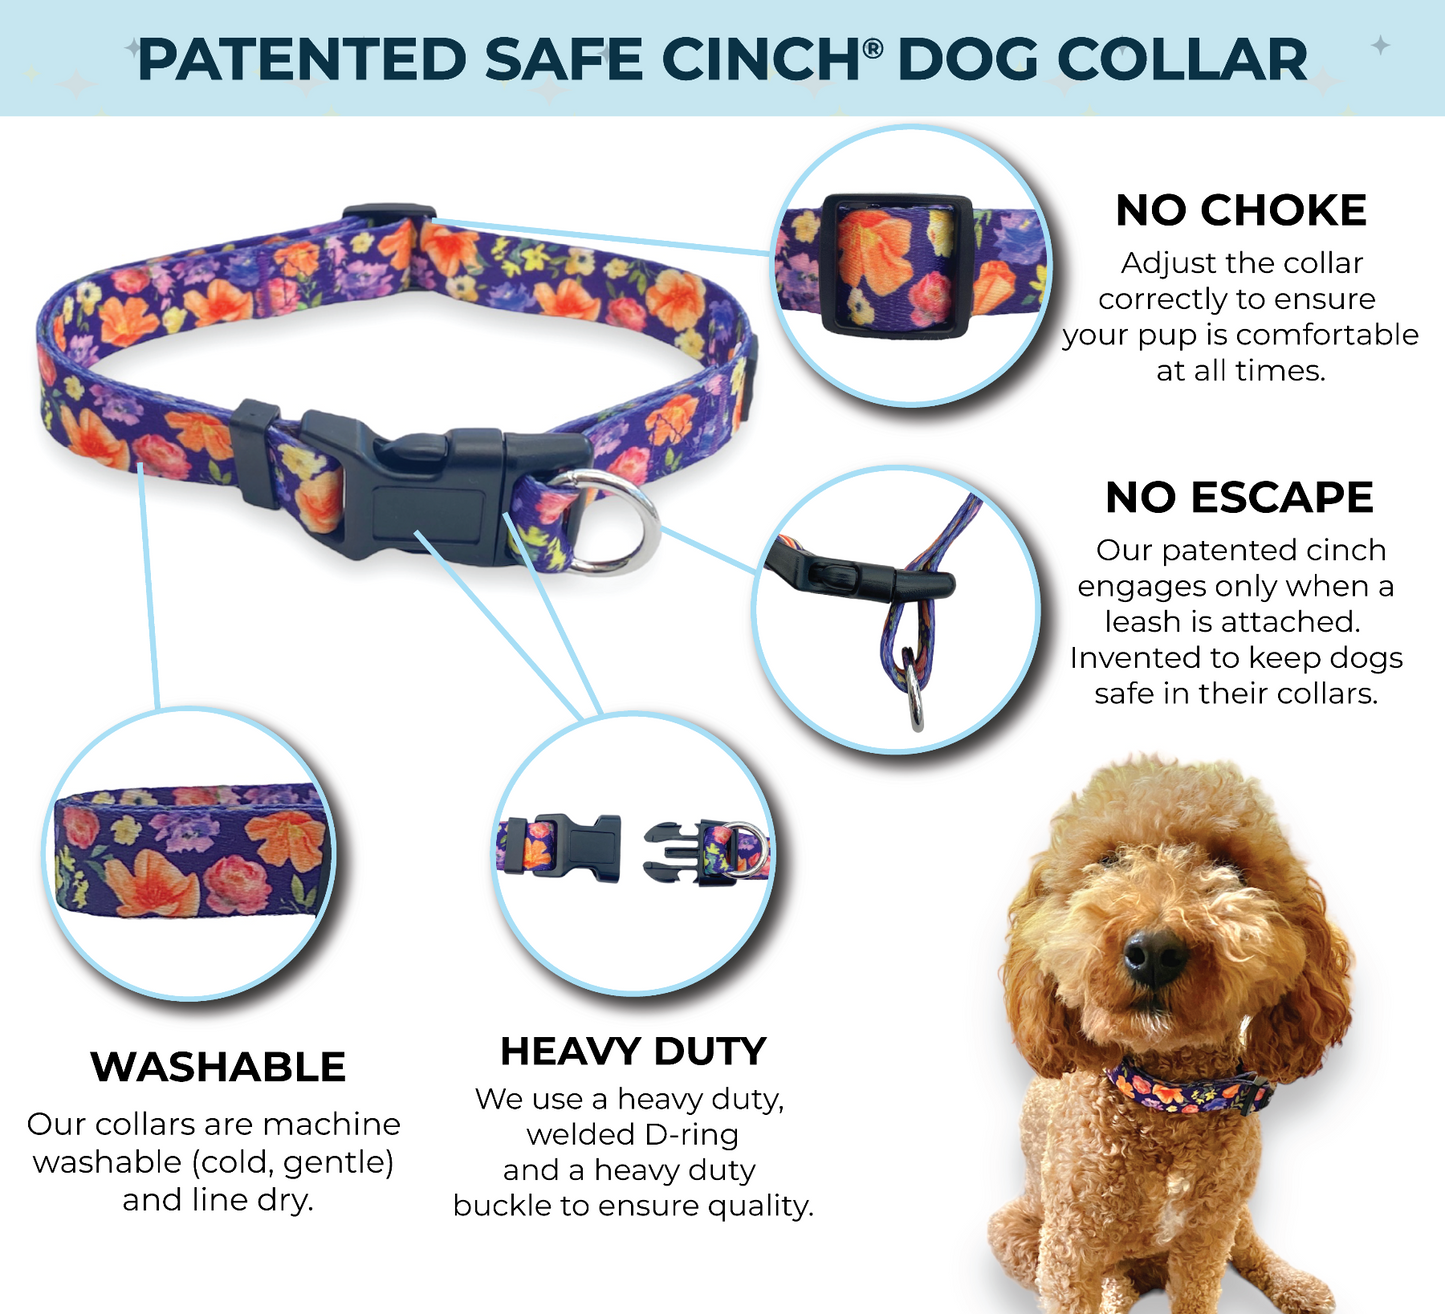 Safe Cinch Collar, No Escape No Choke Dog Collar by Fearless Pet - Purple Poppies